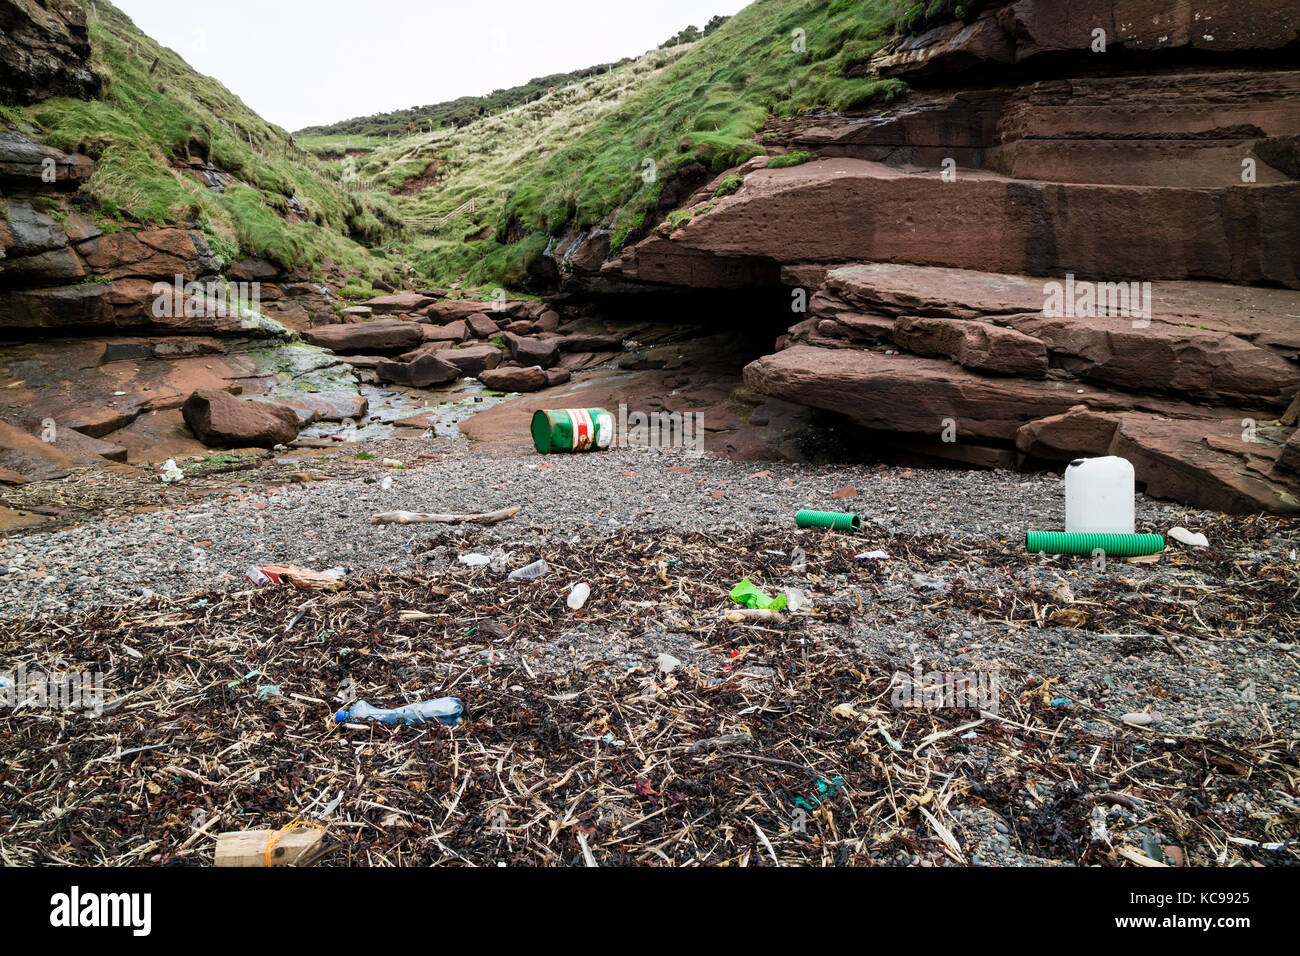 Plastic and other Debris Washed up on the Beach of Fleswick Bay Near St Bees, Cumbria, UK Stock Photo